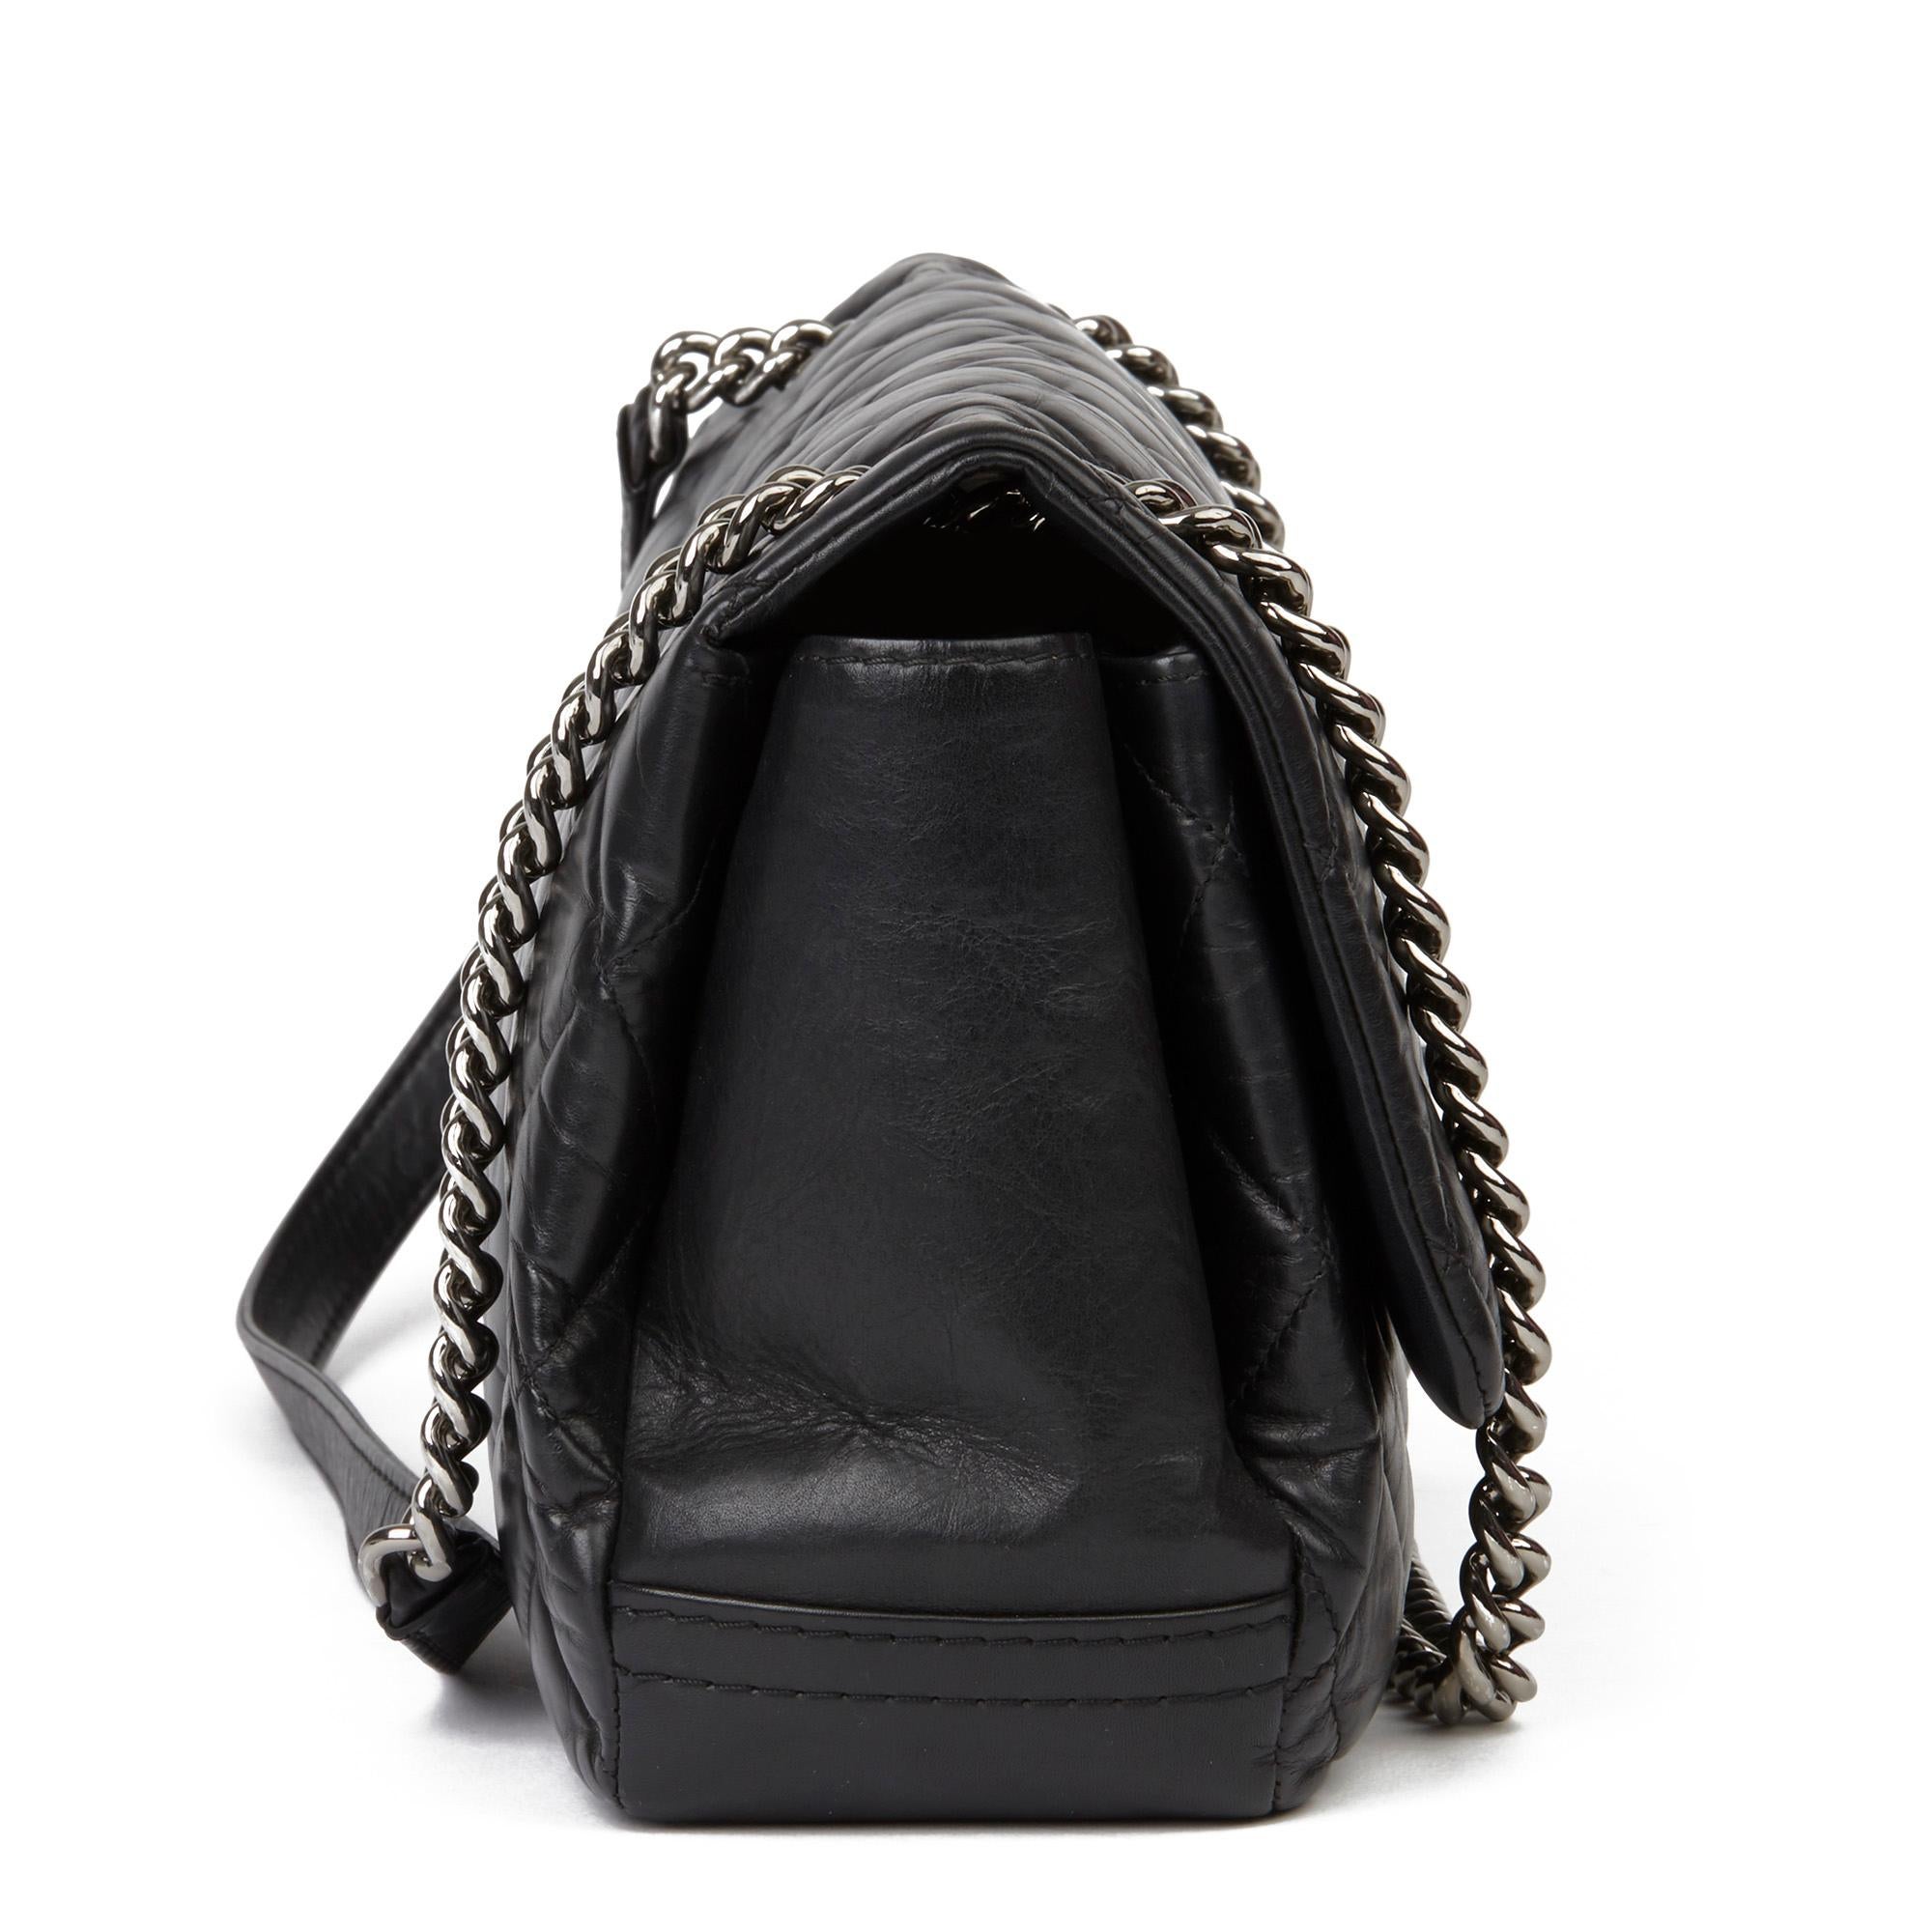 CHANEL
Black Quilted Aged Calfskin Leather Jumbo Lady Pearly Flap Bag

Xupes Reference: HB3430
Serial Number: 16883247
Age (Circa): 2012
Accompanied By: Chanel Dust Bag, Authenticity Card, Invoice
Authenticity Details: Authenticity Card, Serial